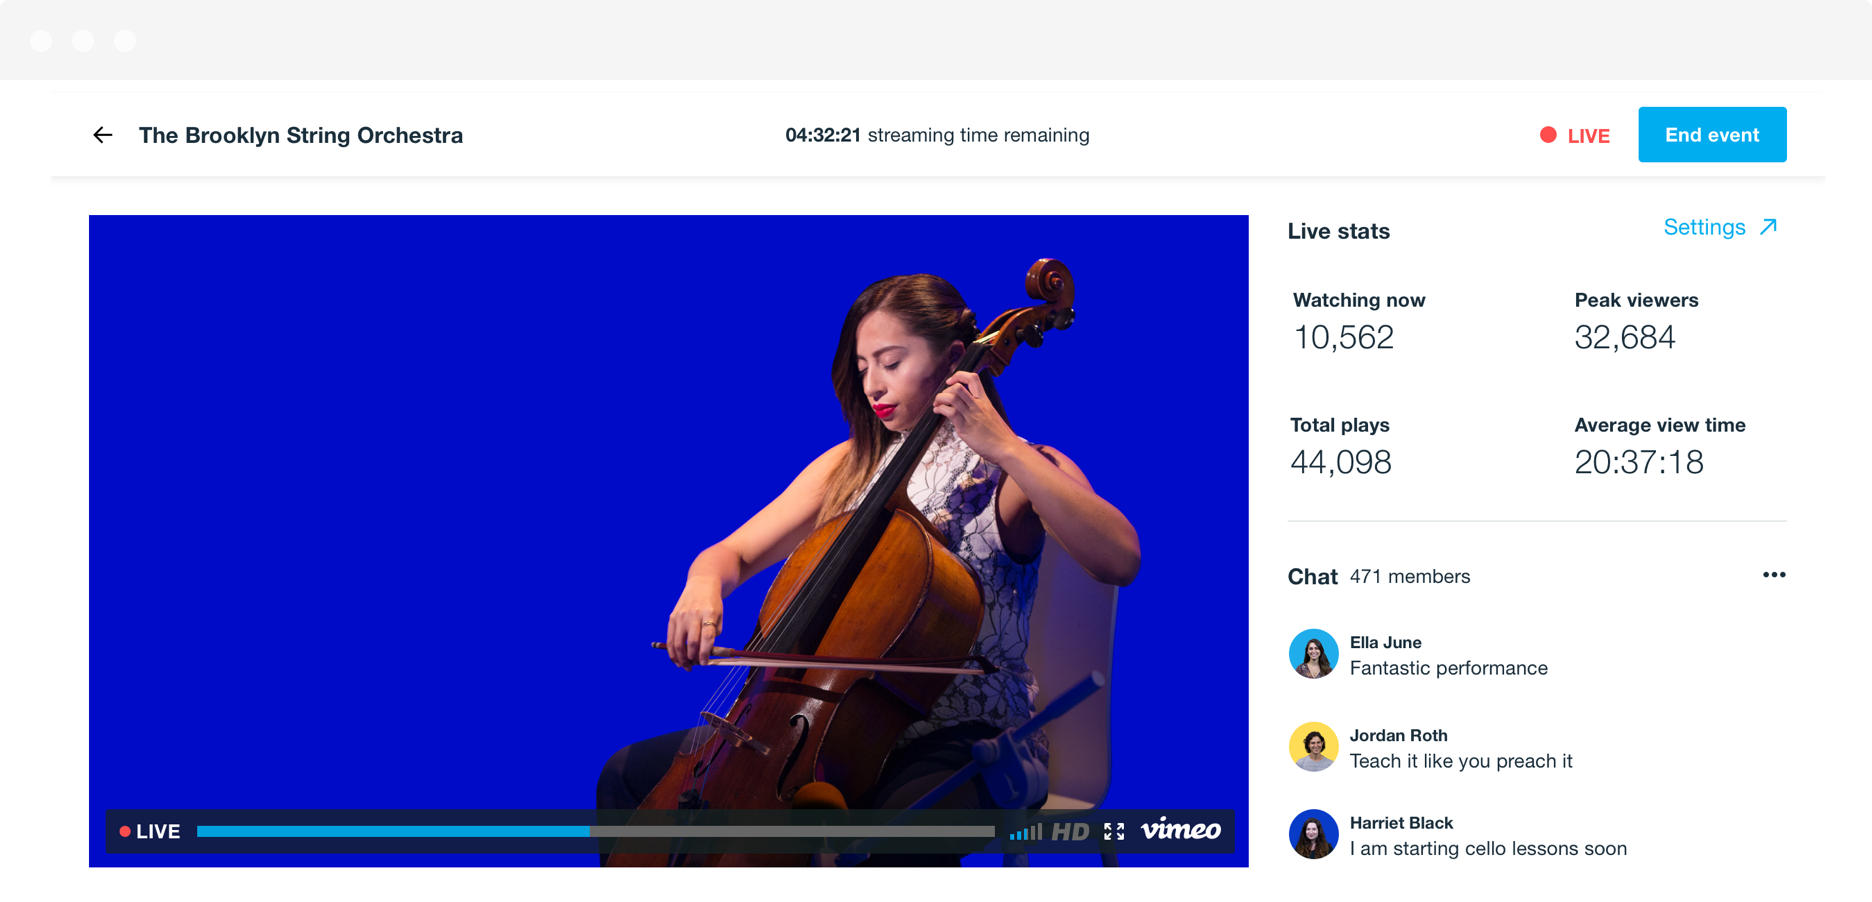 A static shot from a live stream of a cellist, showing the video player as well as the live stats and audience chat in real-time on the righthand side.